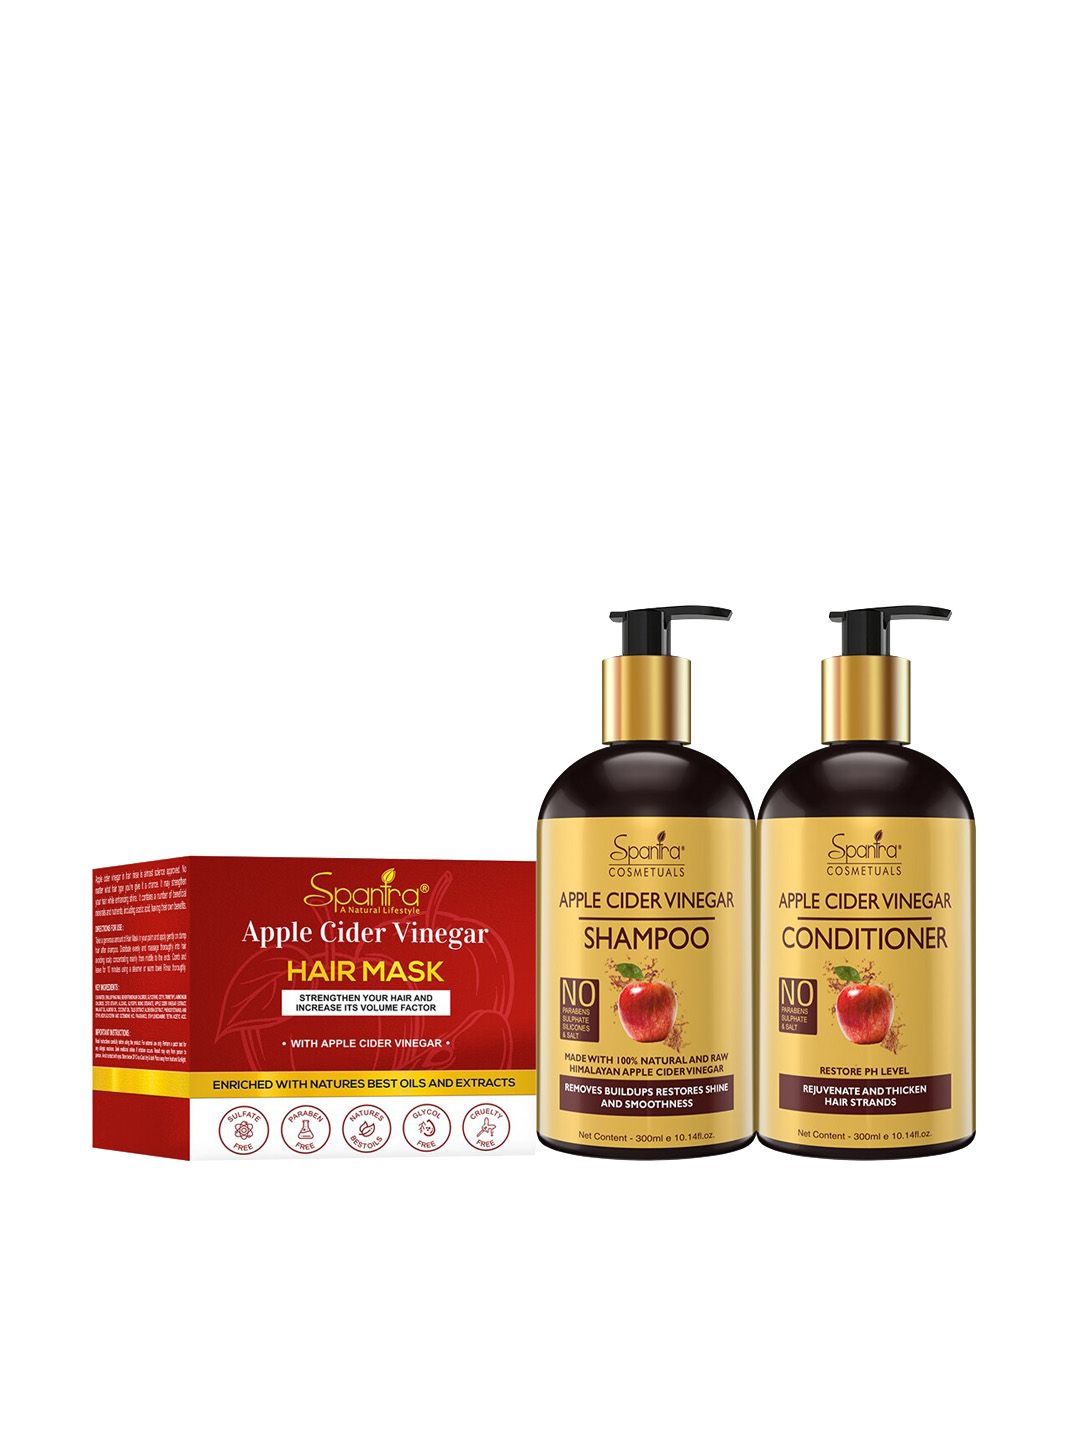 Spantra Apple Cider Vinegar Shampoo & Conditioner with Hair Mask Price in India